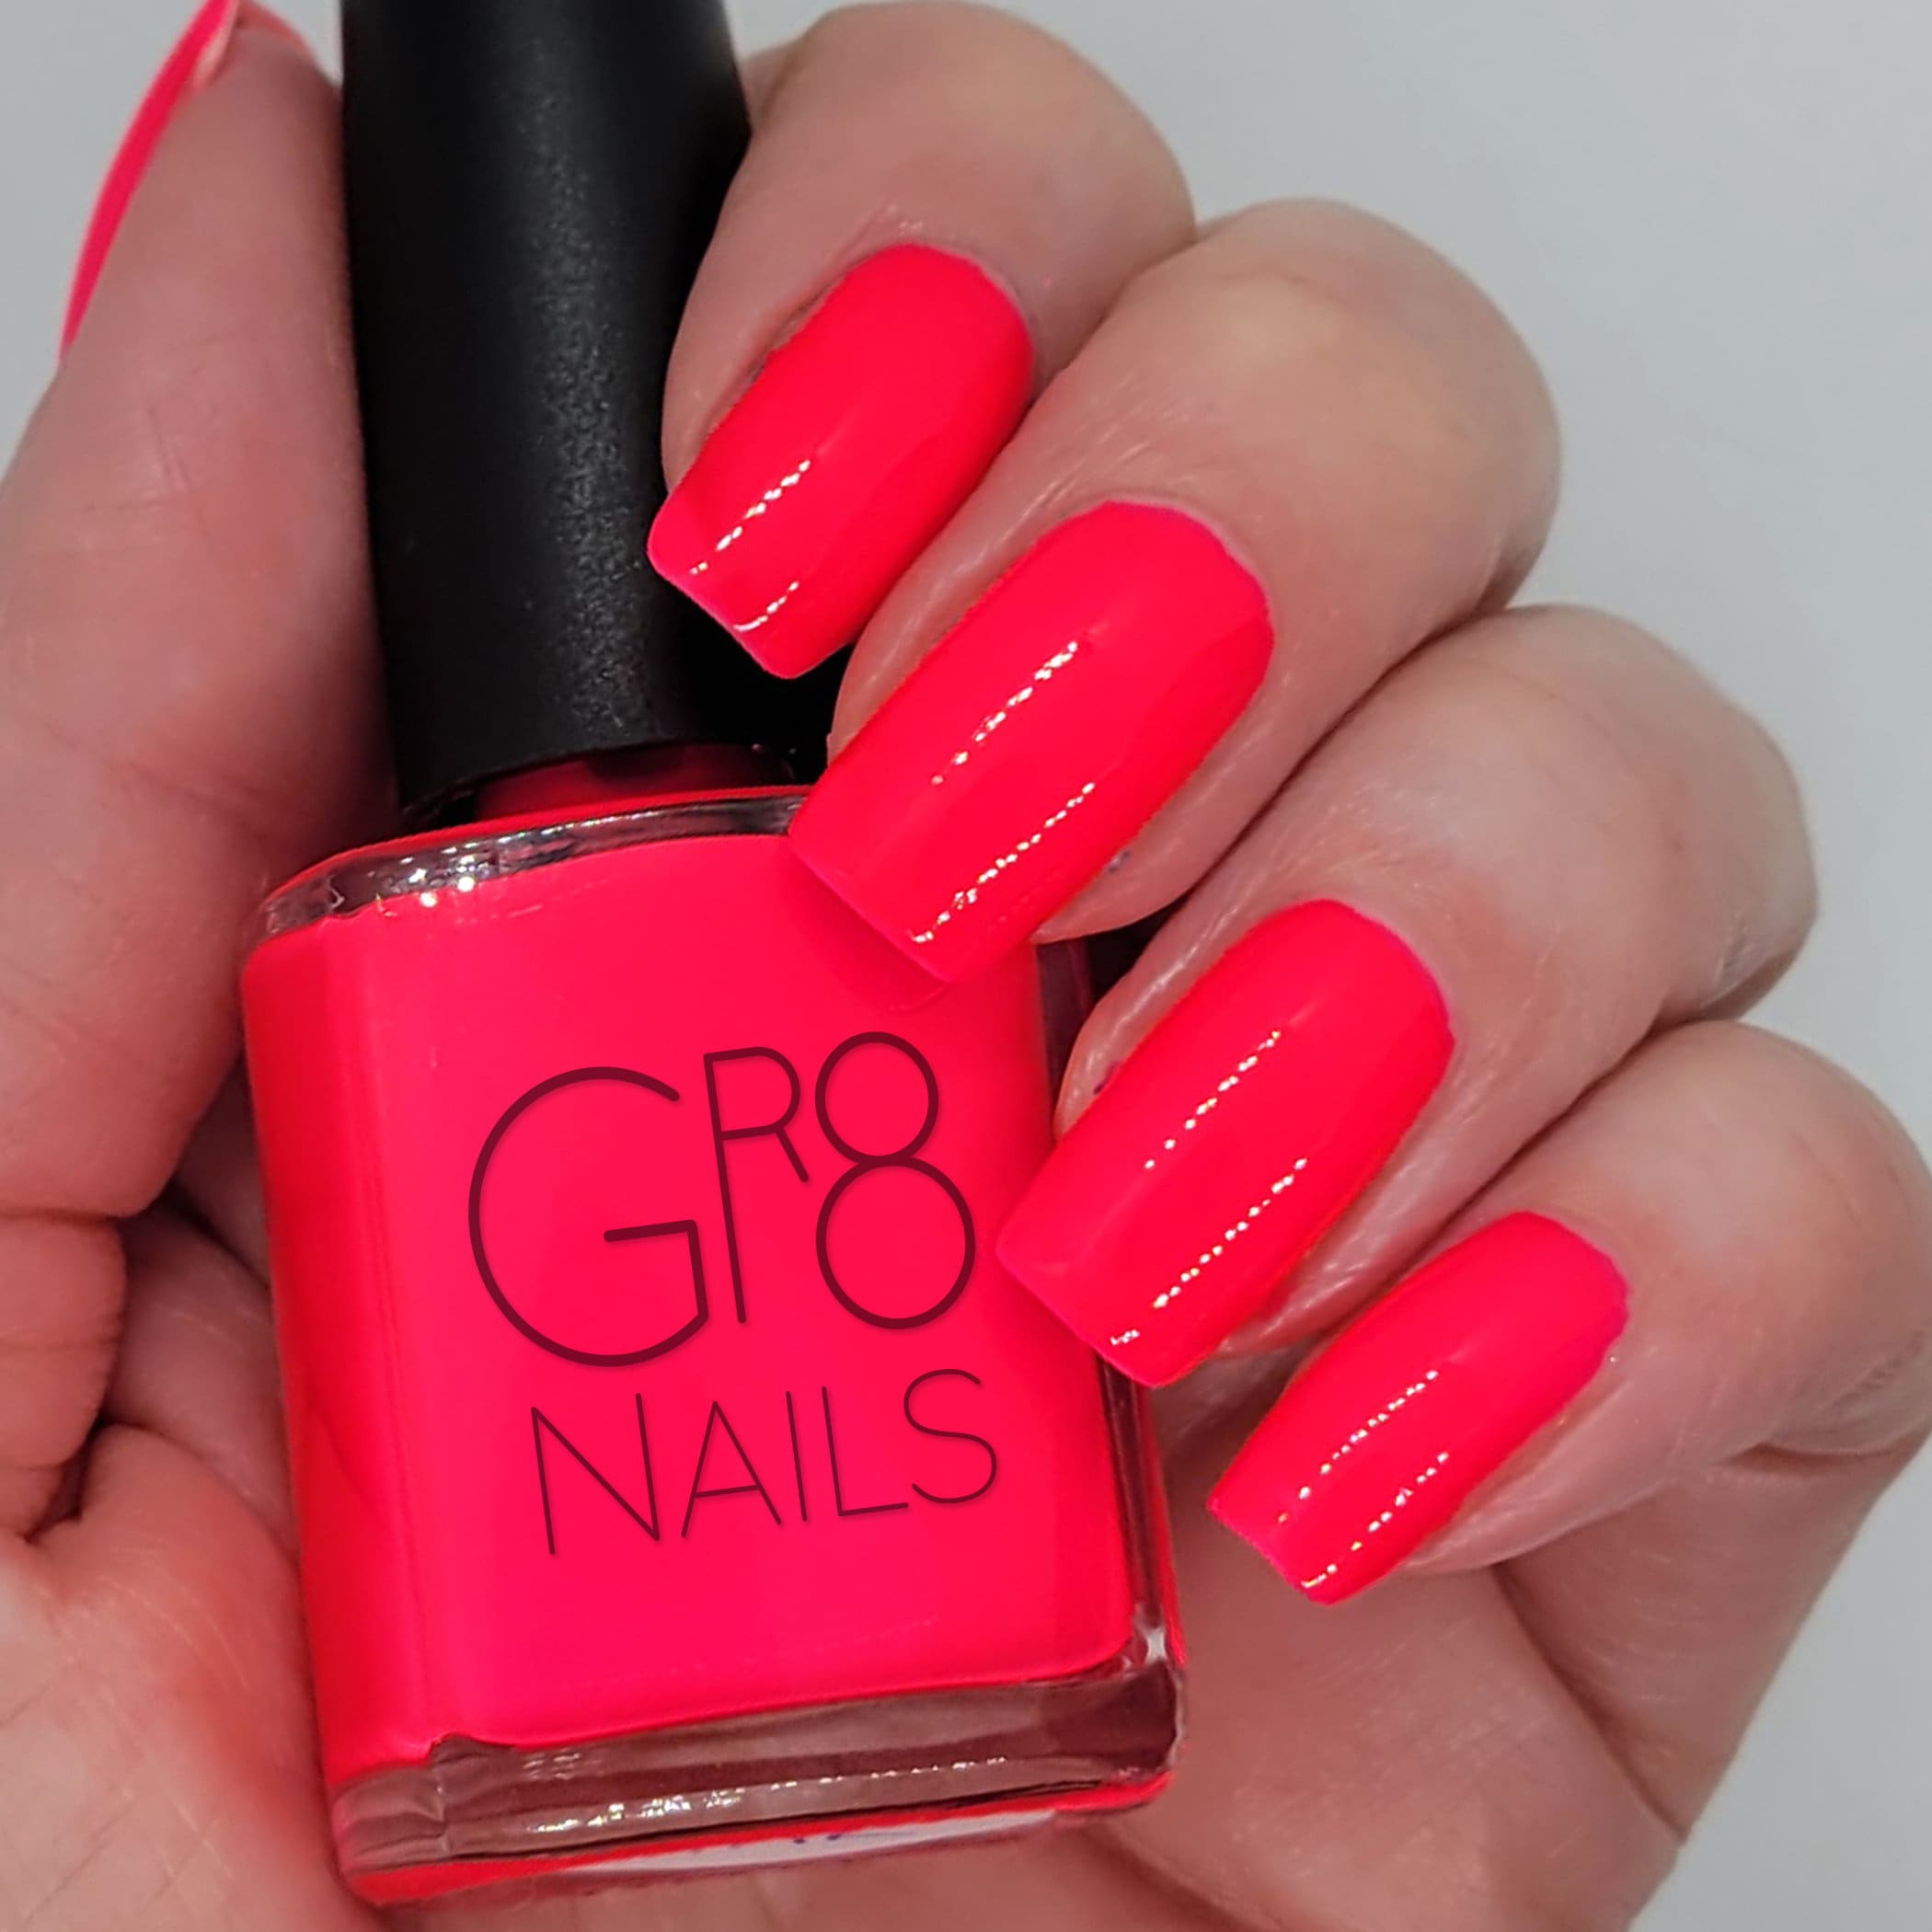 Summer Nails | Summer pedicure, Trendy nails, Manicure and pedicure